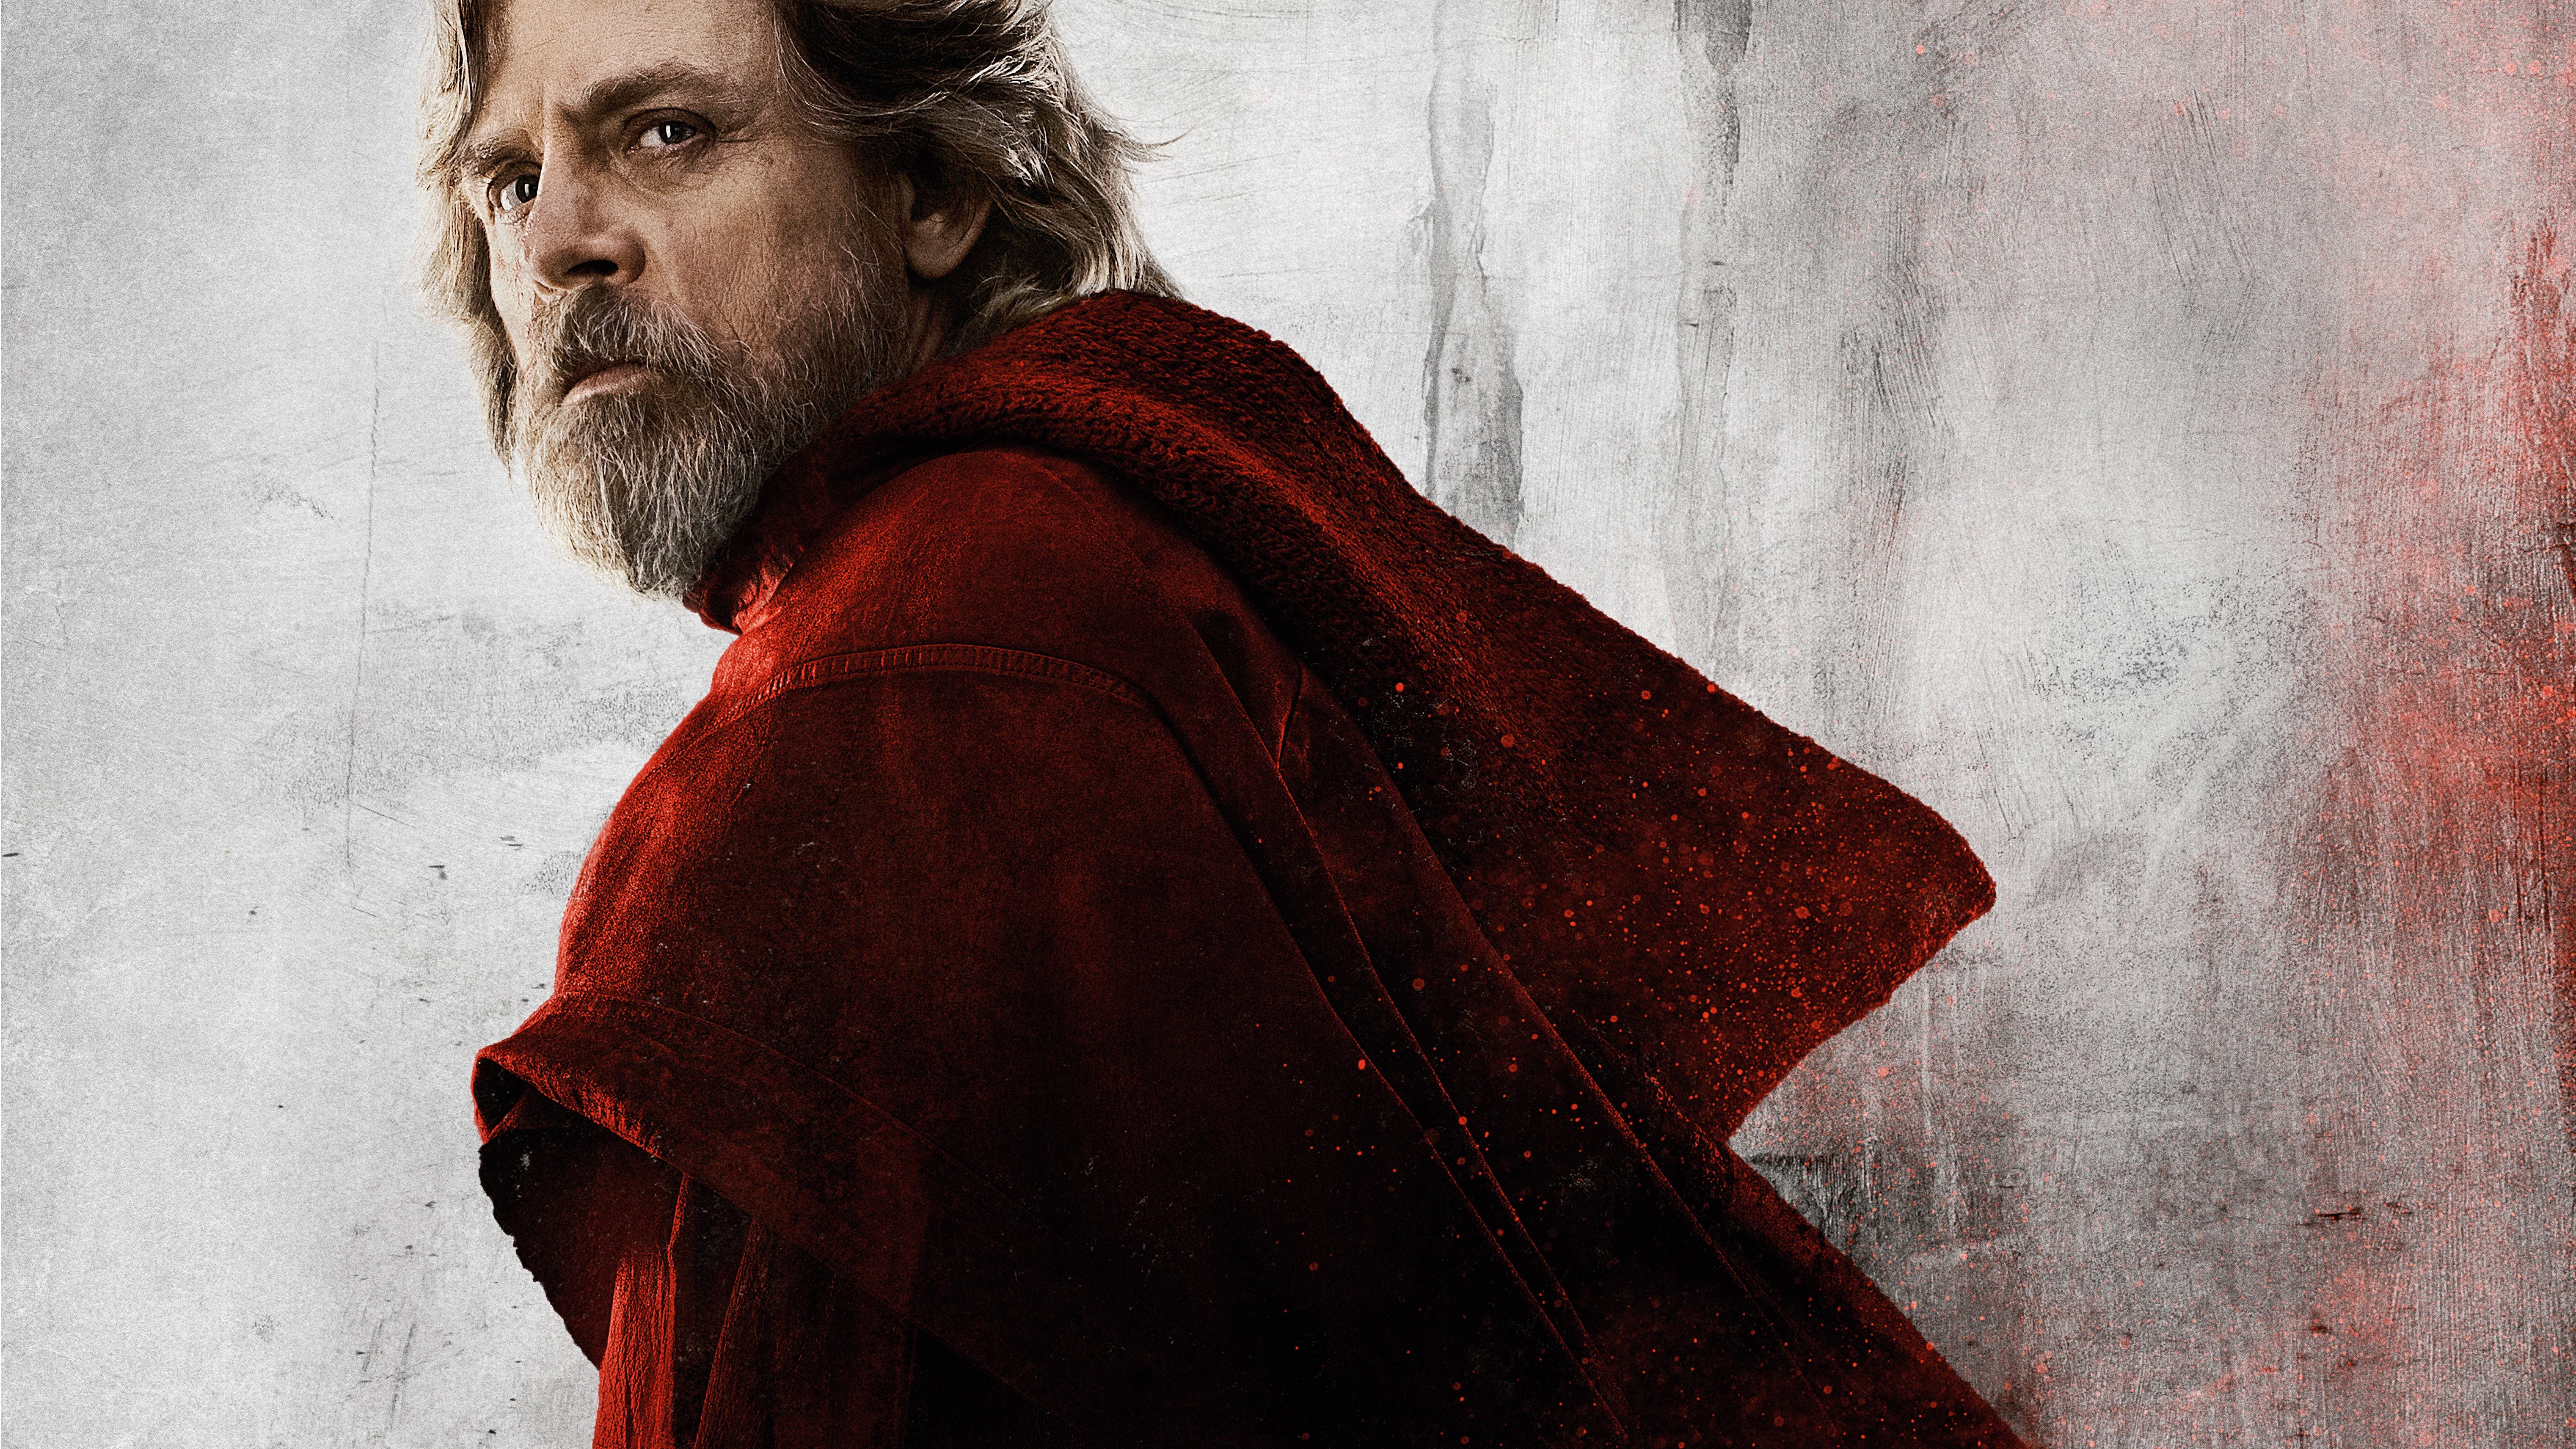 Star Wars' Mark Hamill Turns 63 Years Old Today